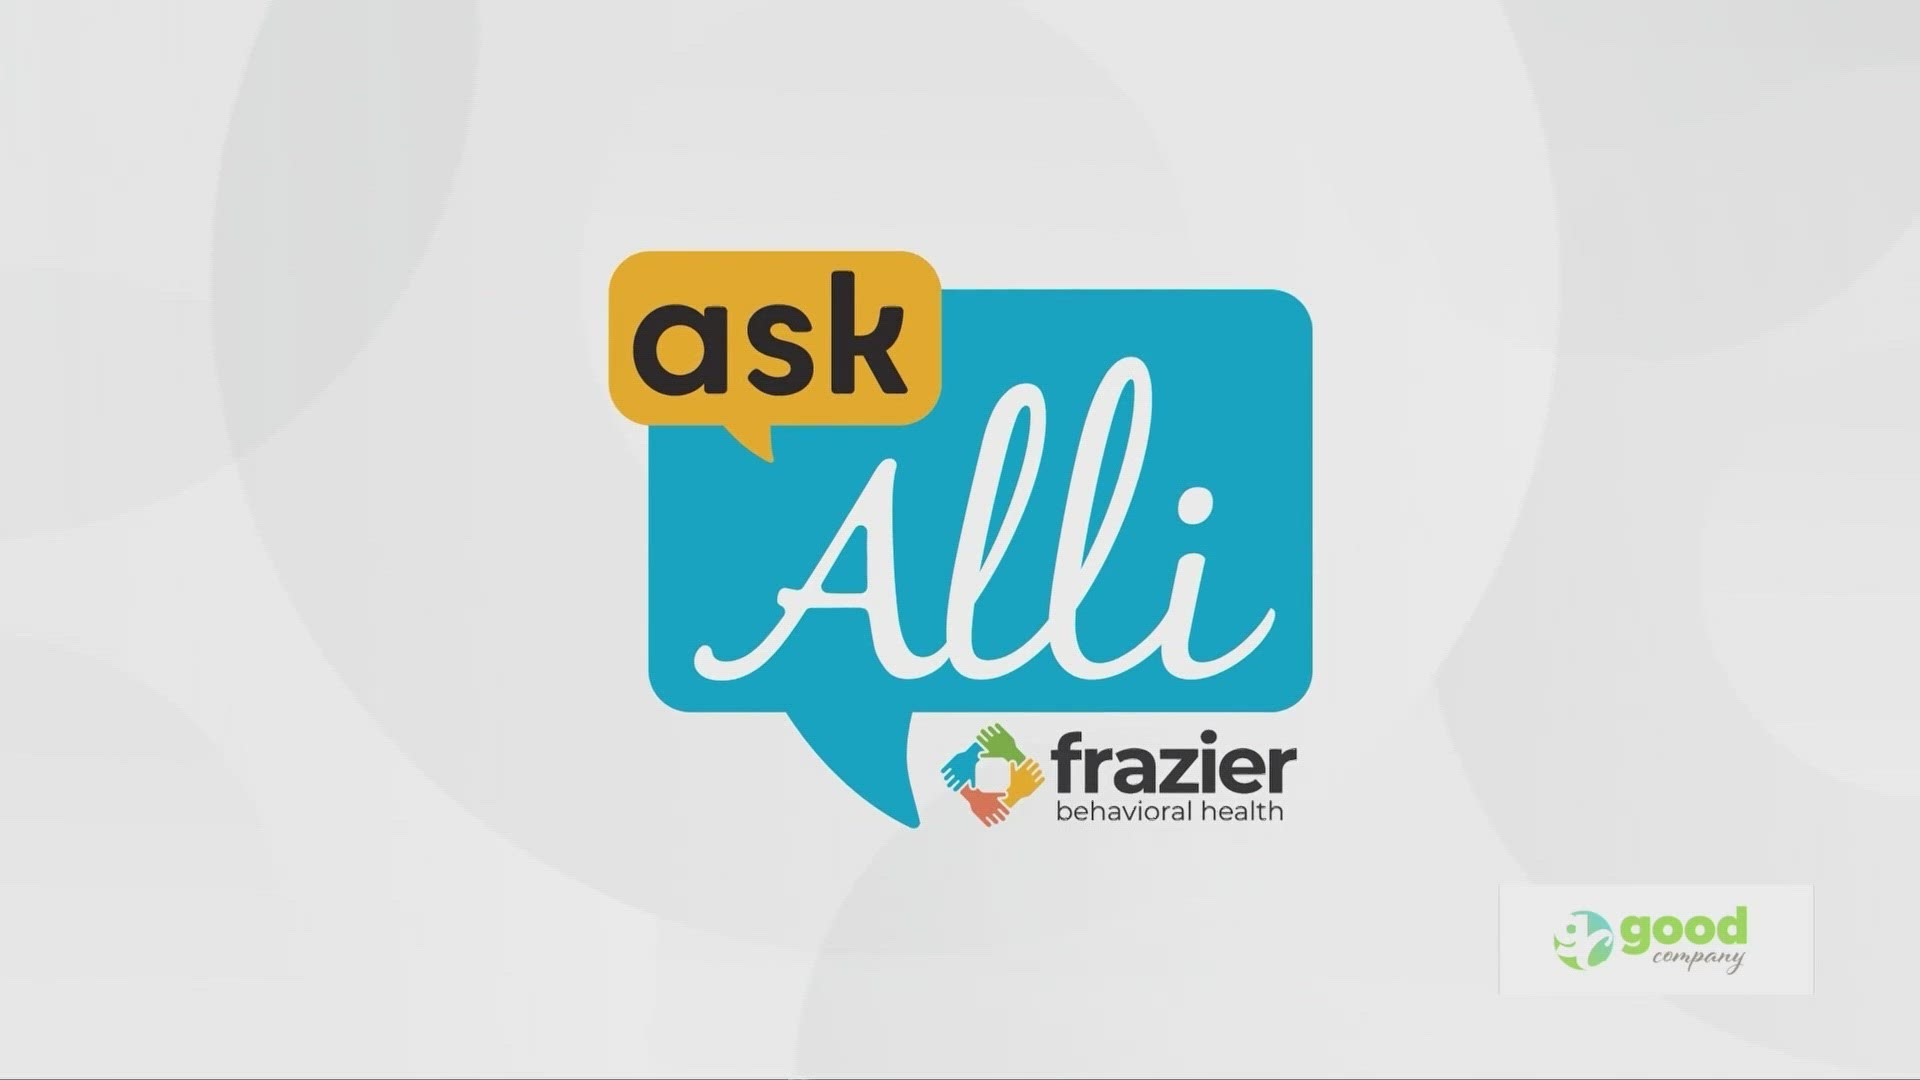 Joe talks with Alli Frazier about the ways we can stay mindful of our loved ones during Autism Awareness Month.